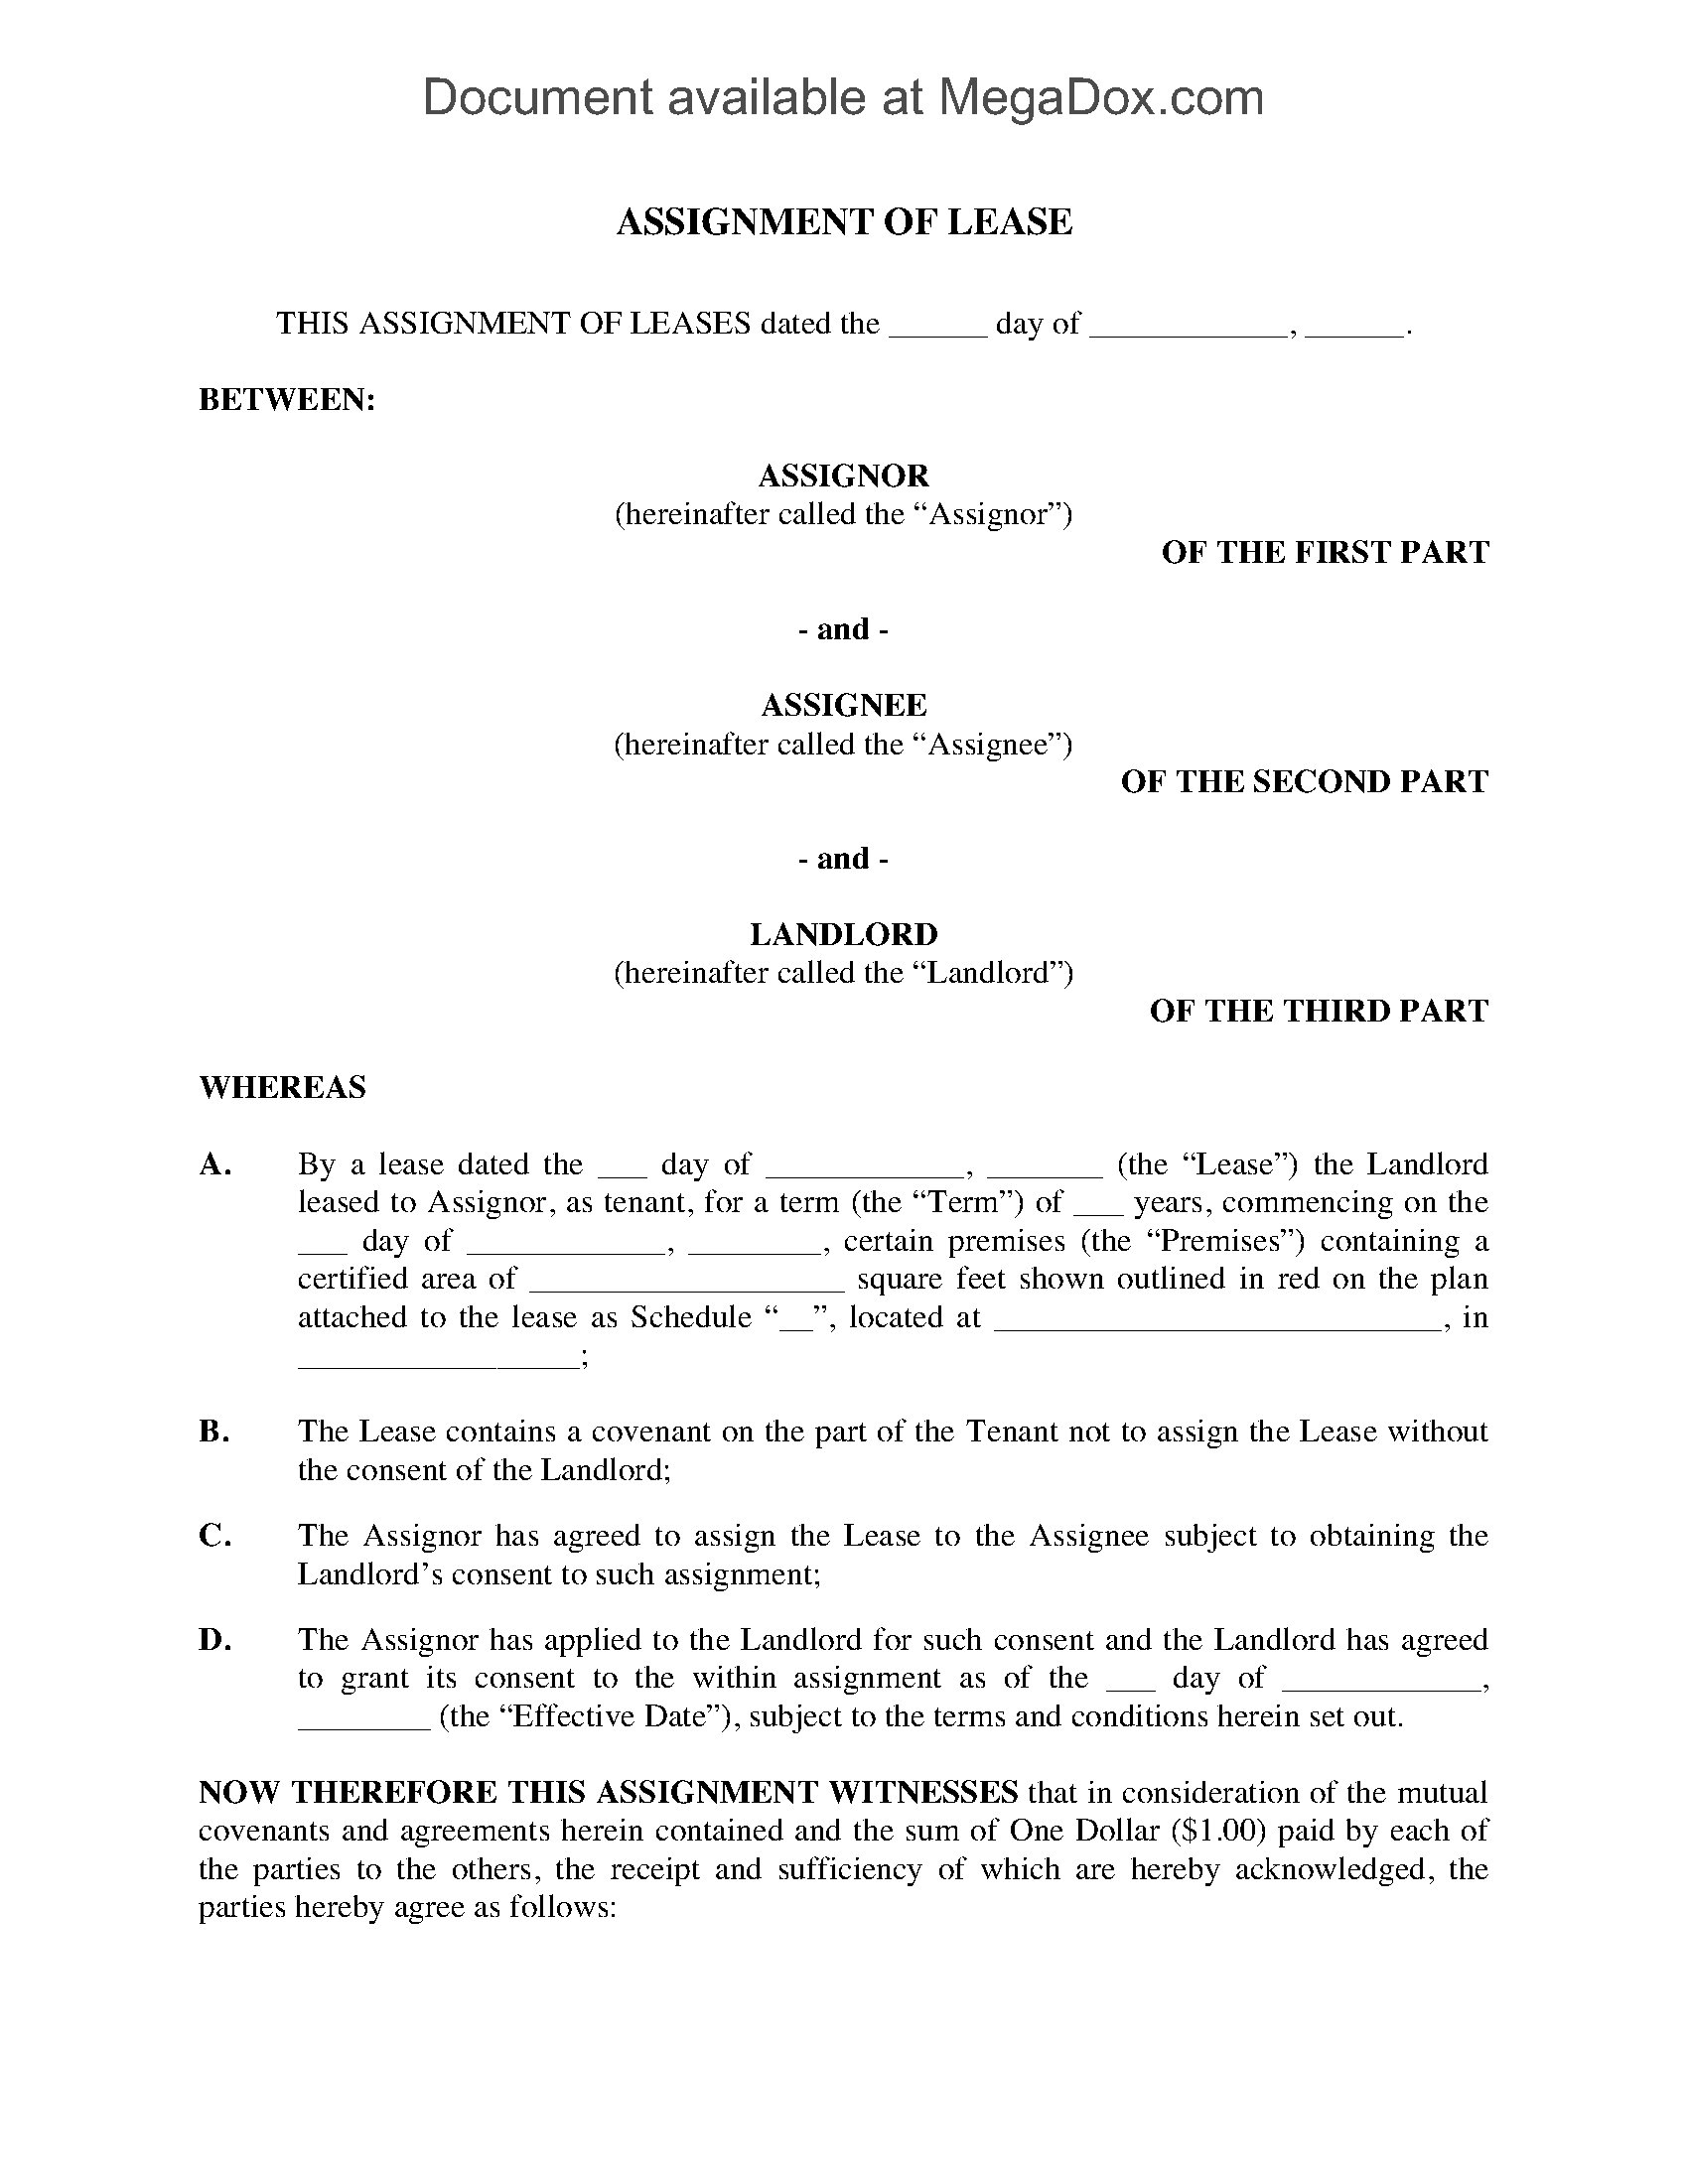 commercial lease assignment form